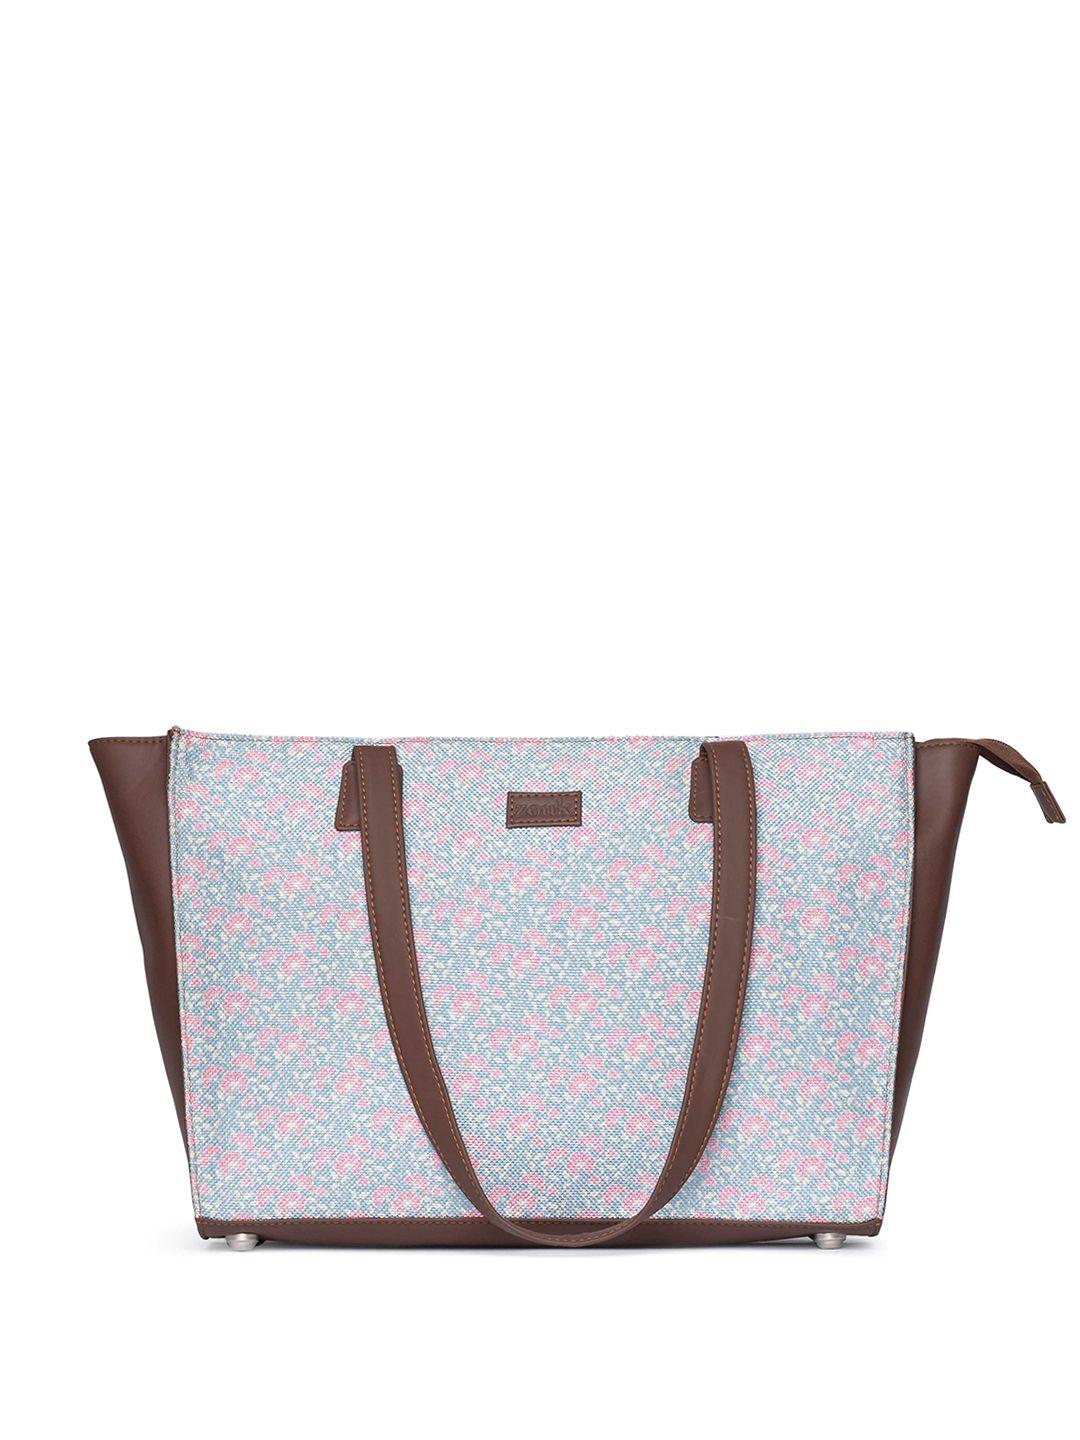 zouk floral printed structured vegan leather tote bag